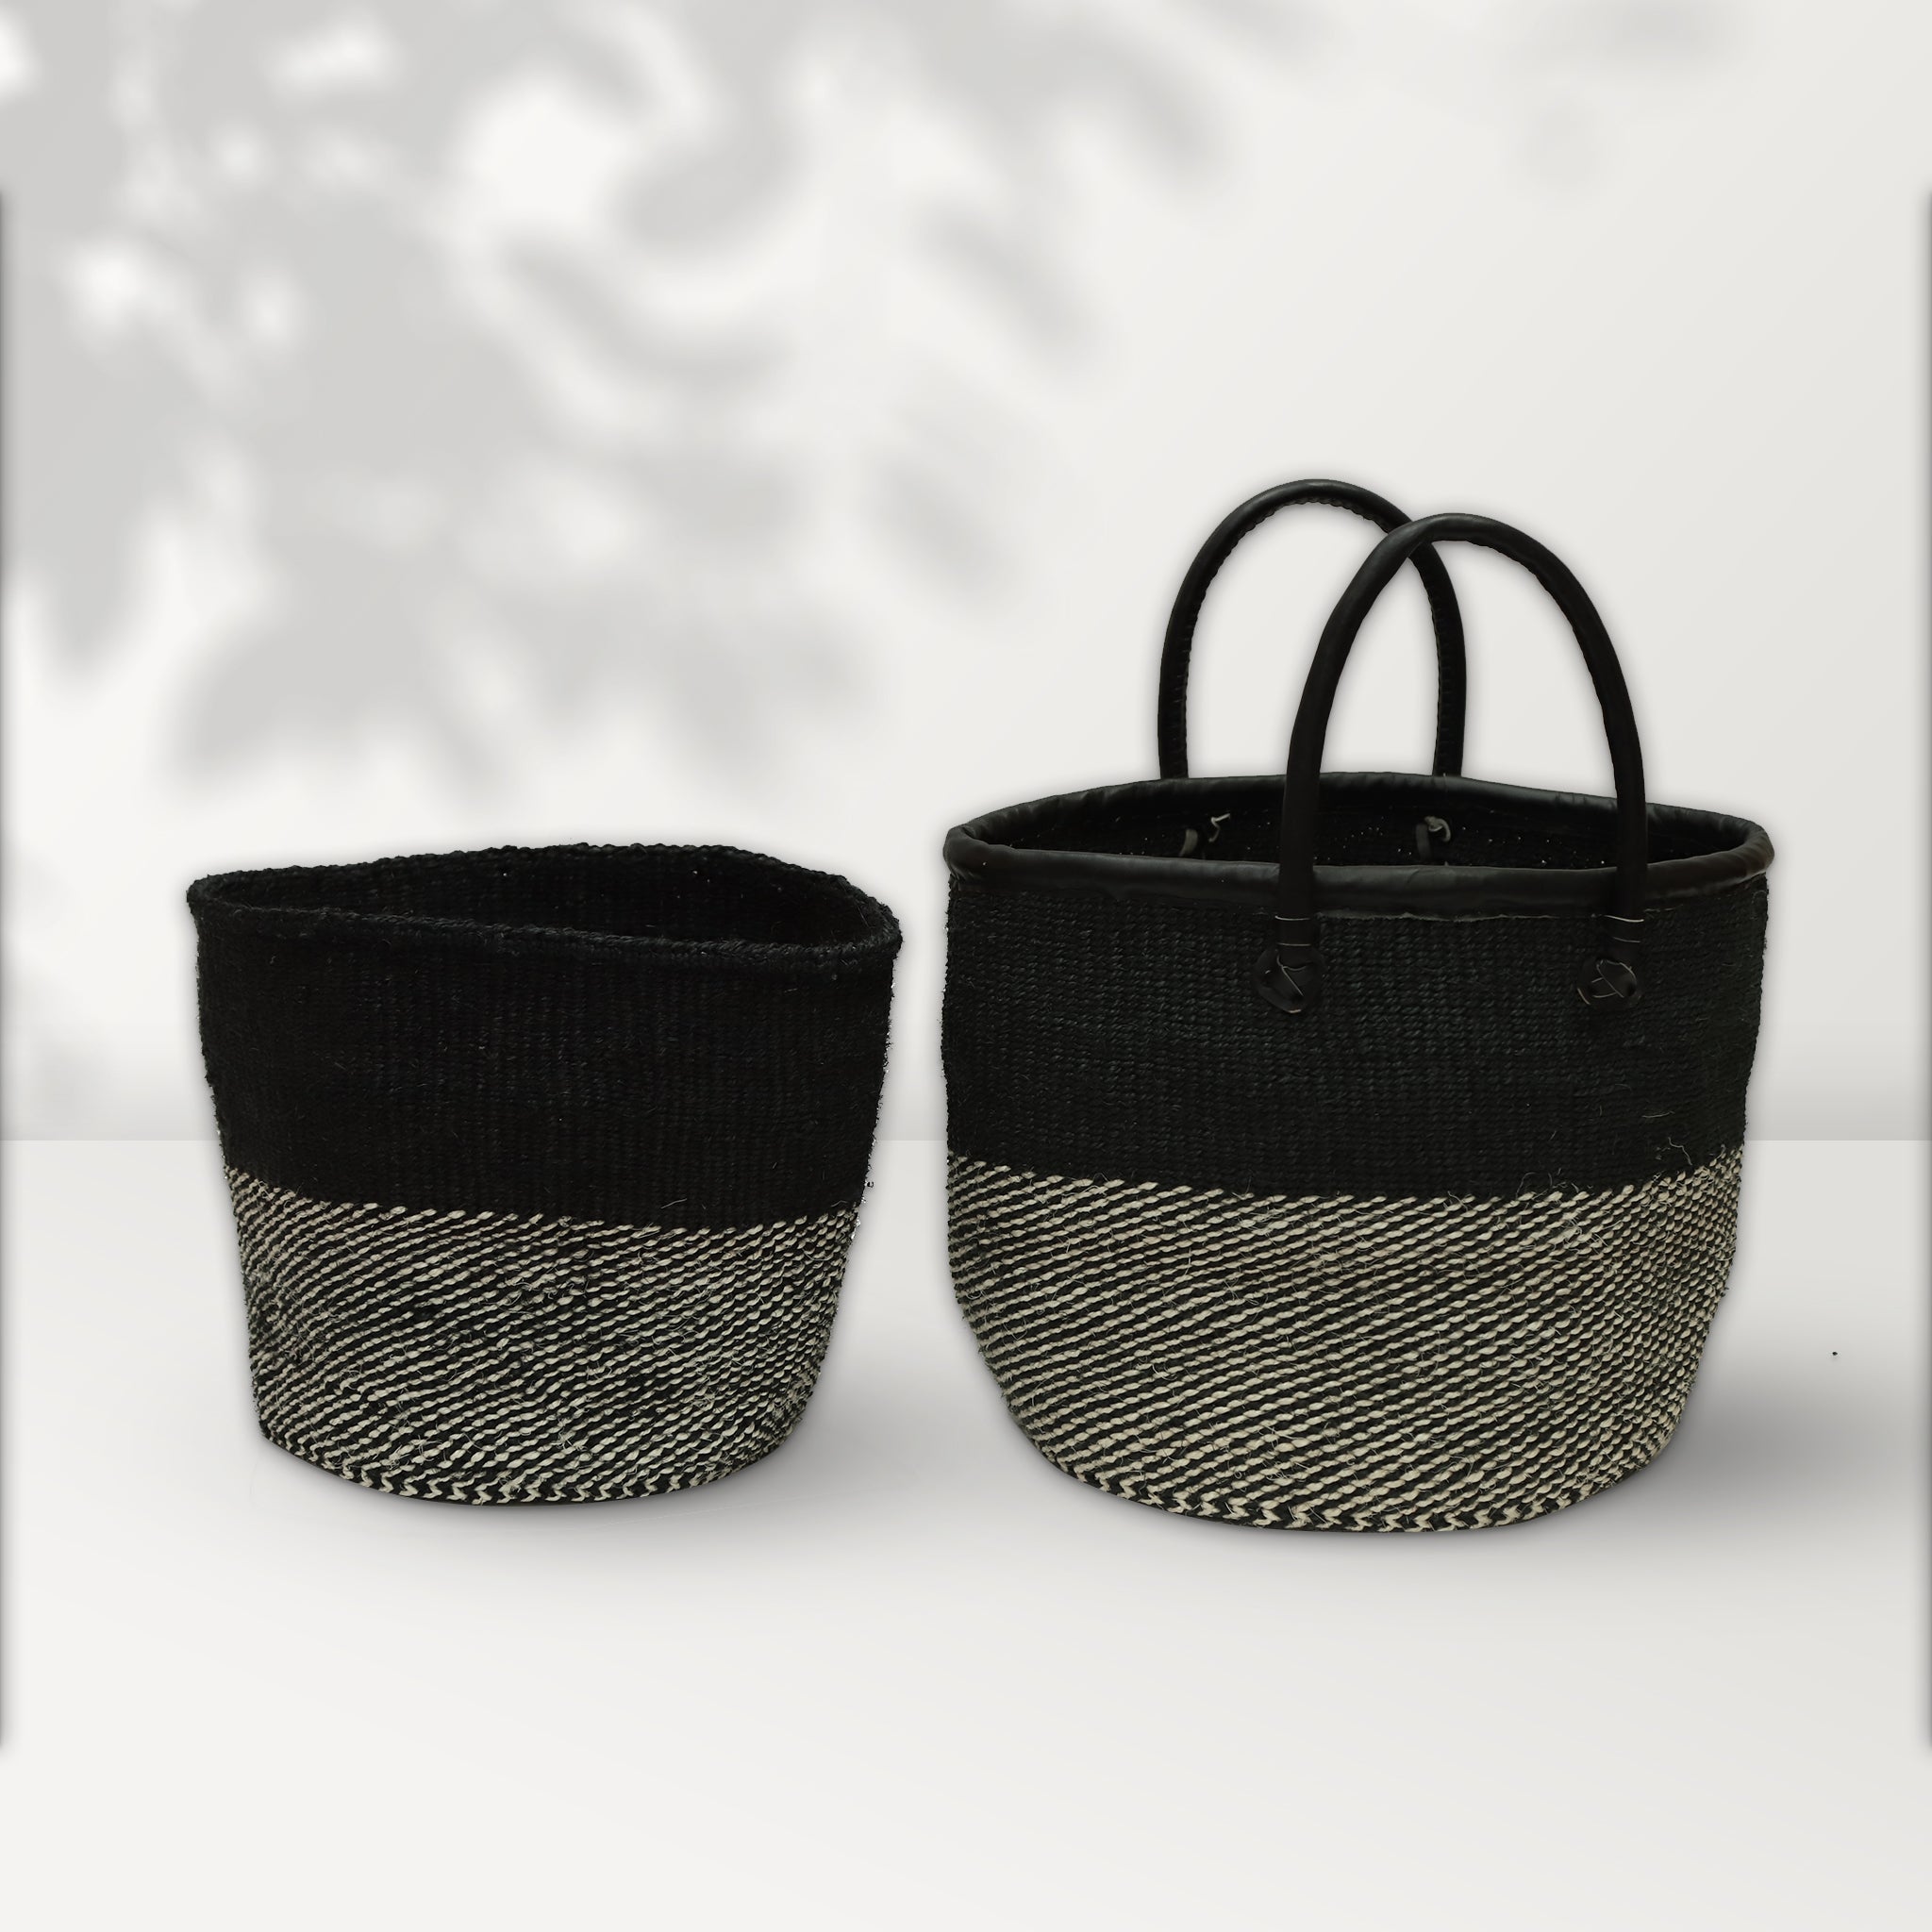 AFRICAN SHOPPING KIONDO  Two-Tone Handwoven Basket with handles for Storage Set  12” and 10” - Tobmarc Home Decor & Gifts 